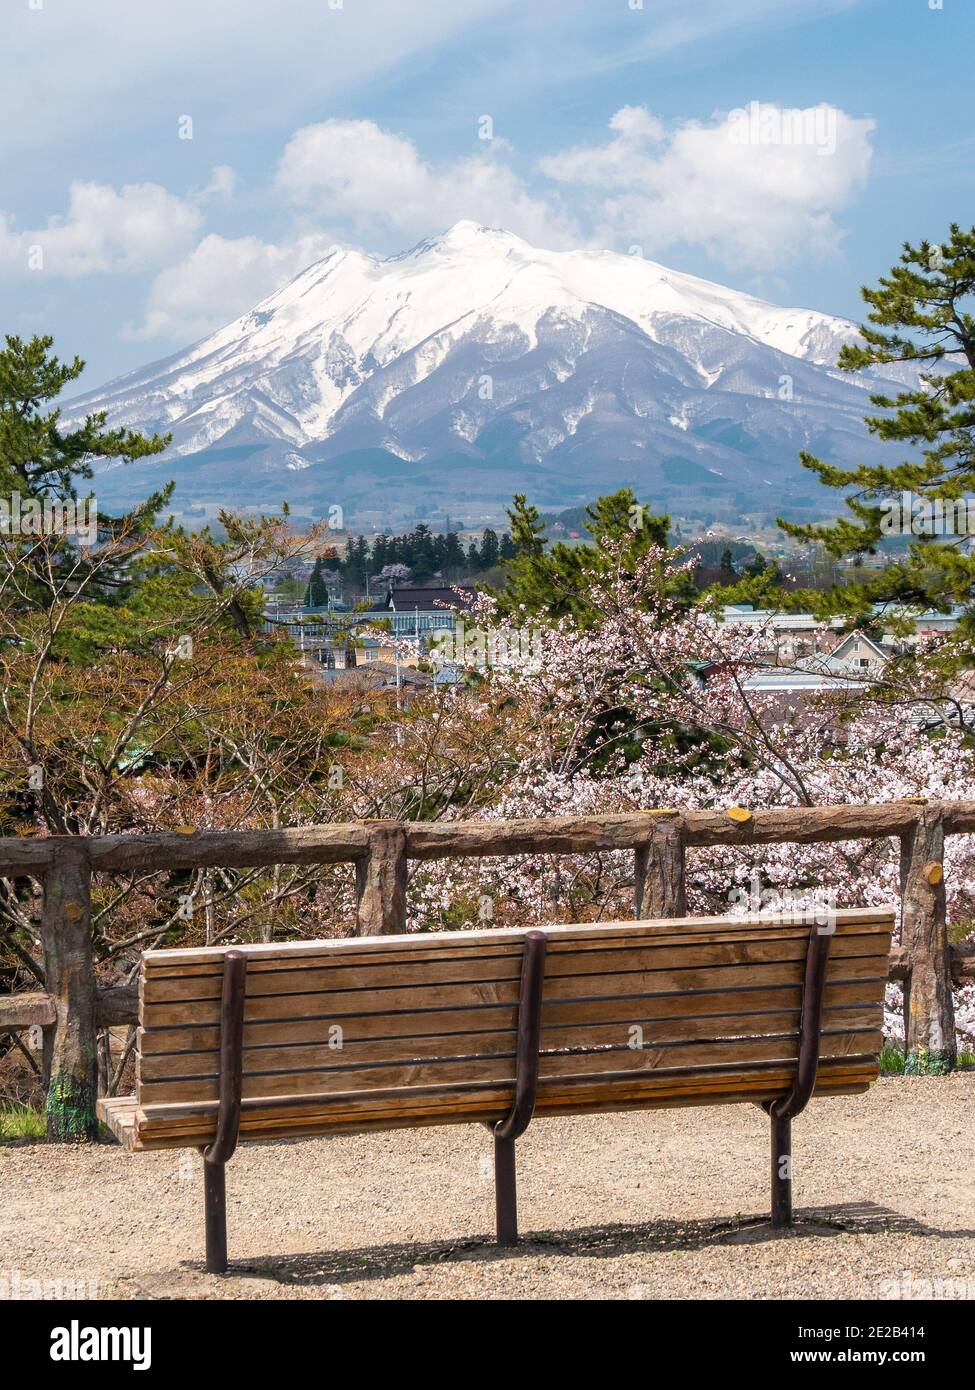 Landscape of mountain Fuji with view of city and benches at foreground Stock Photo